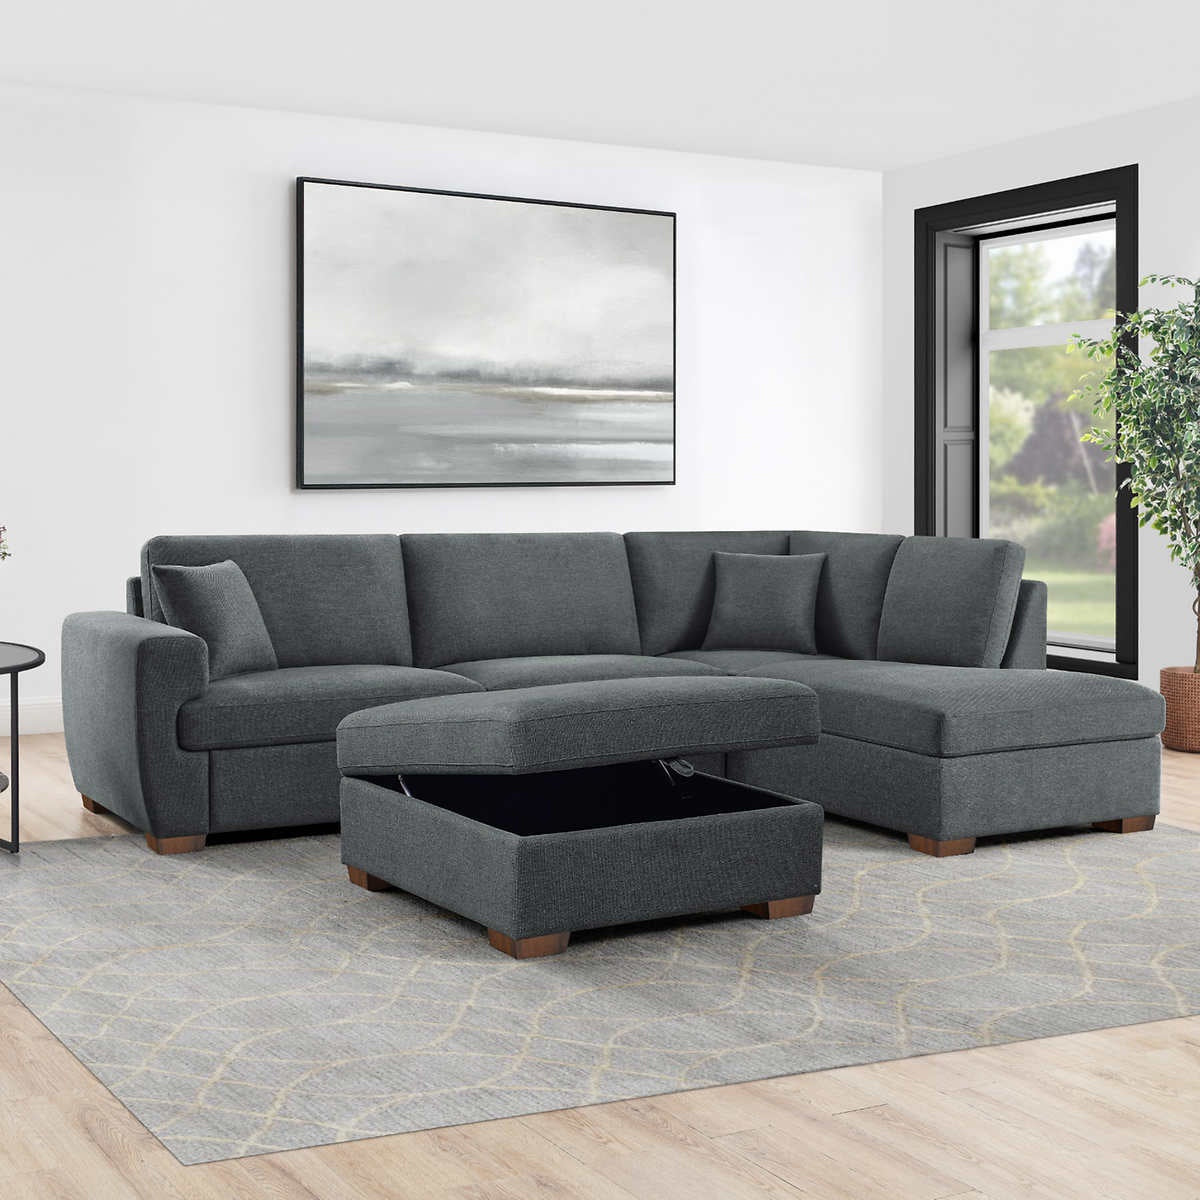 Thomasville 3-piece Sectional with Storage Ottoman